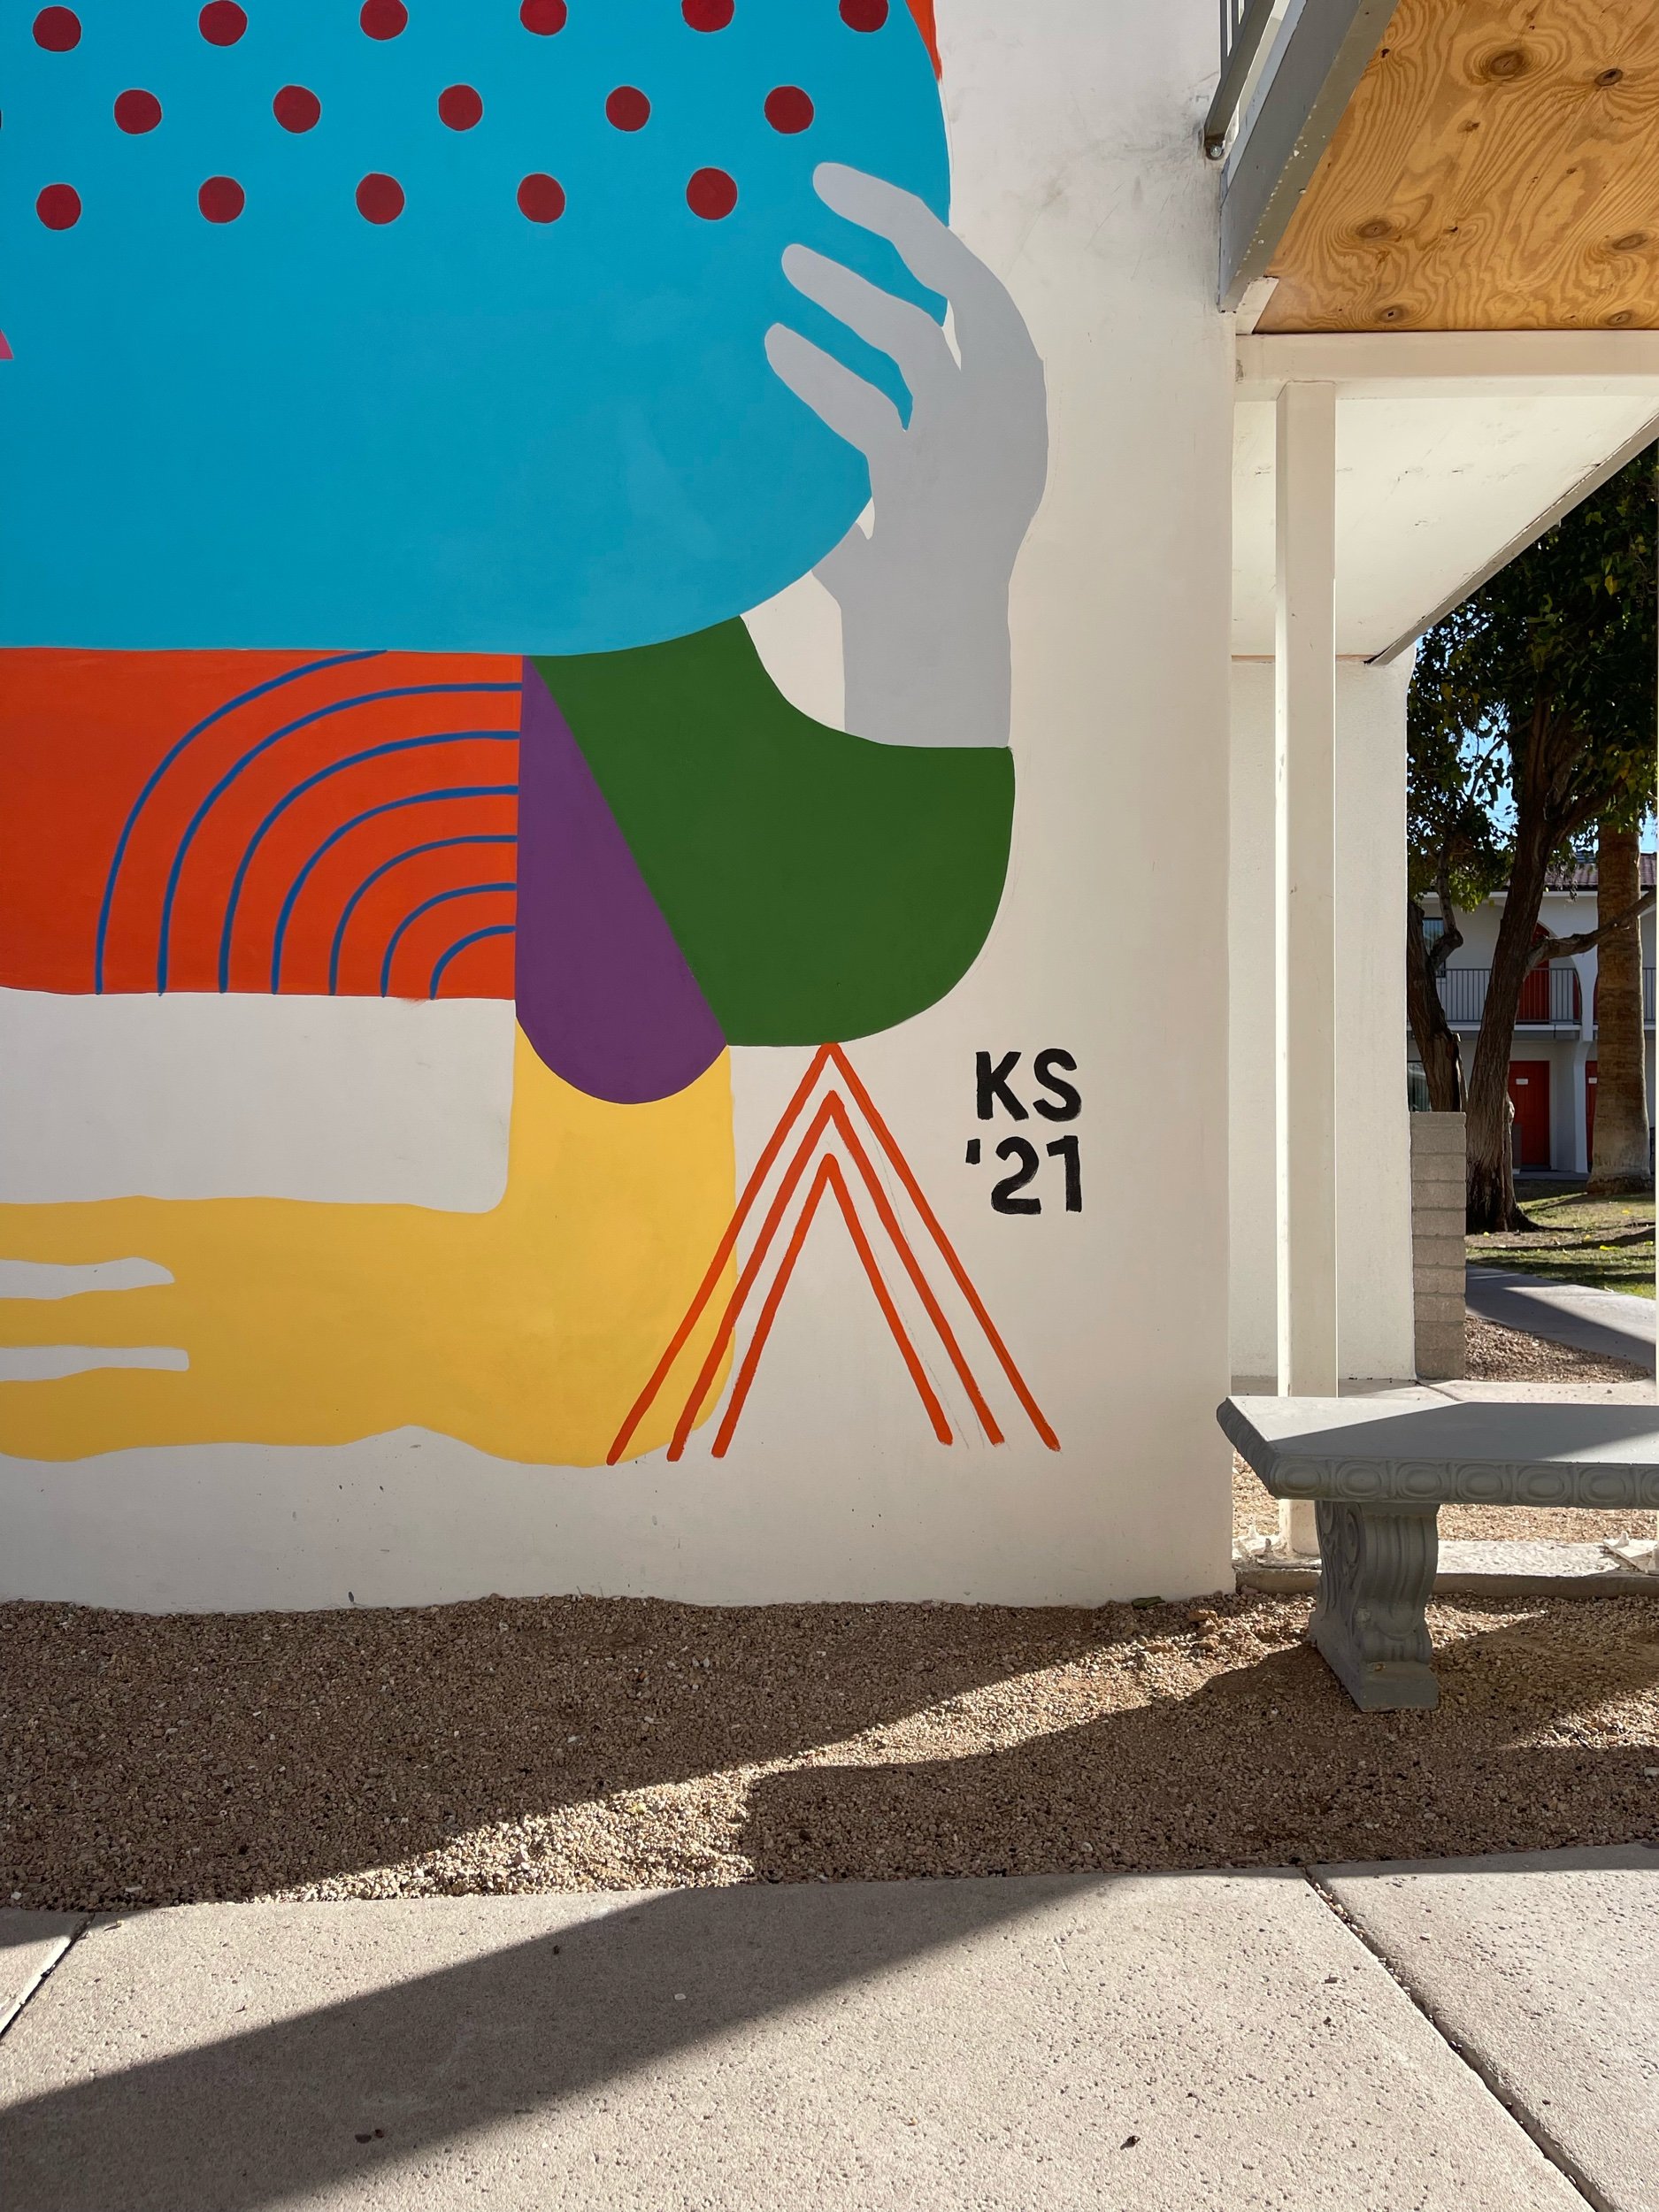 Detail of Kyle Steed mural with signature and date at Polanco Property in Scottsdale, AZ